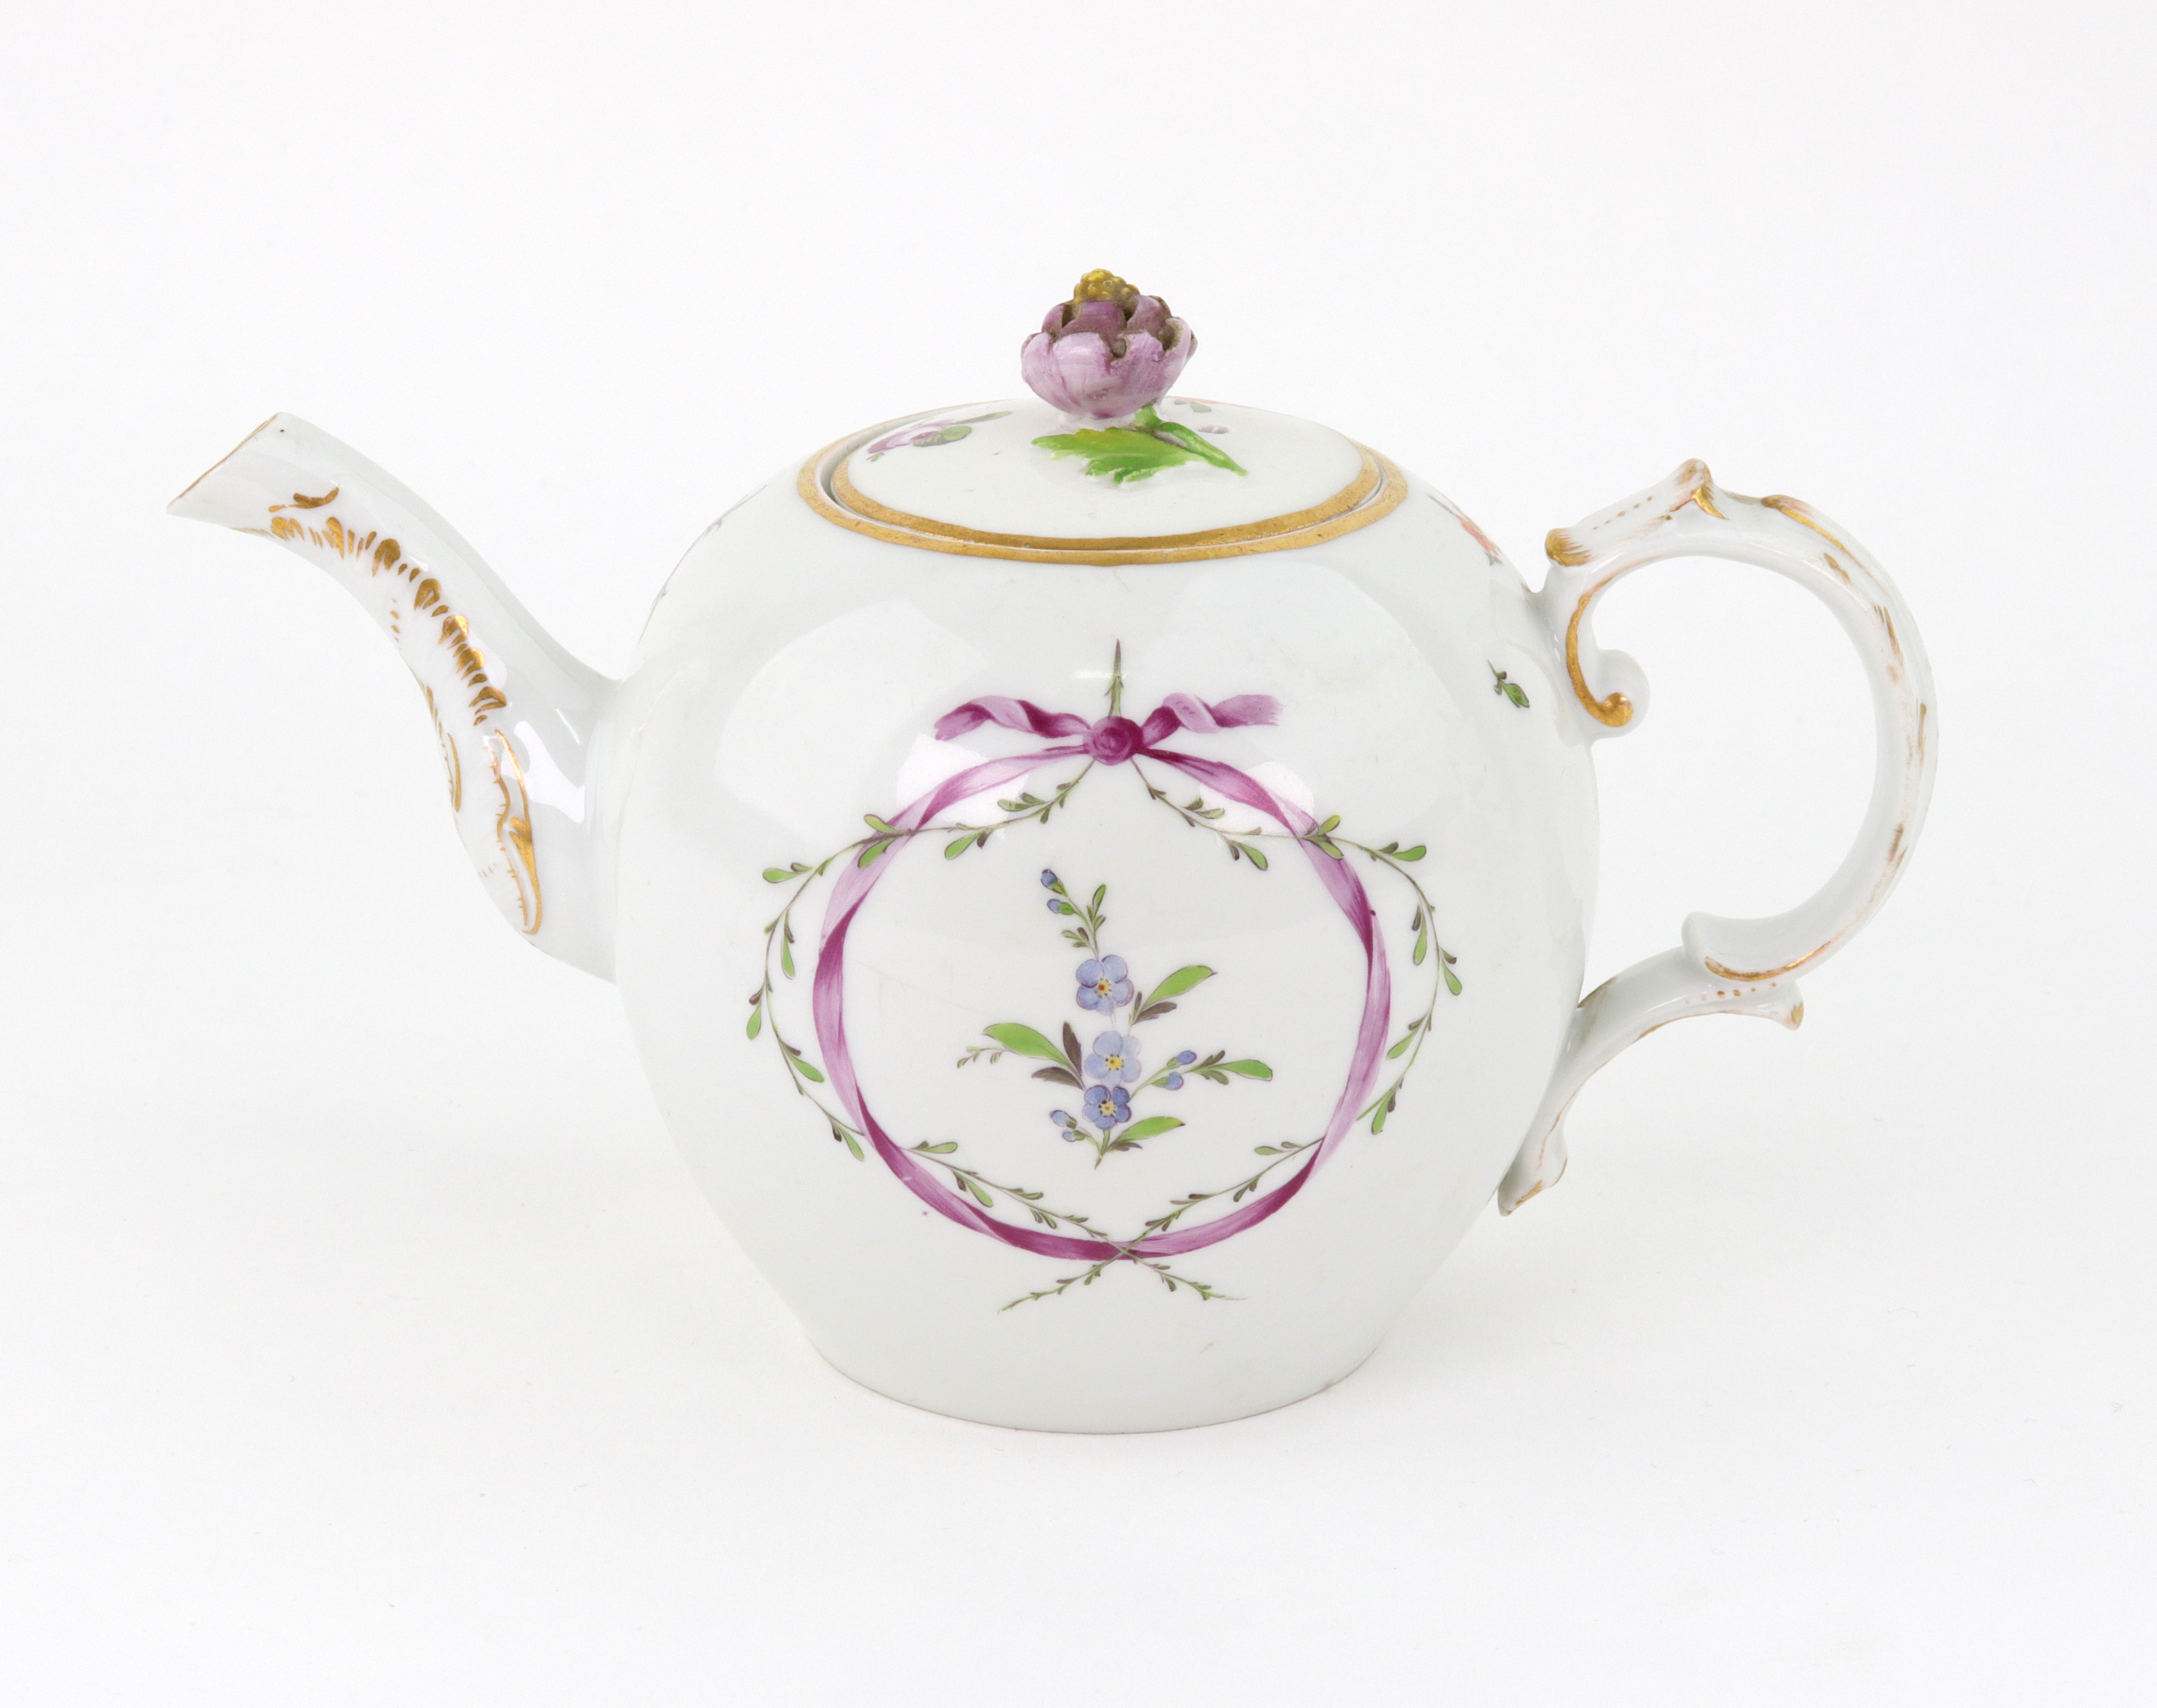 A Furstenberg porcelain bullet shape teapot, late 18th century, painted with flowers, - Image 2 of 3